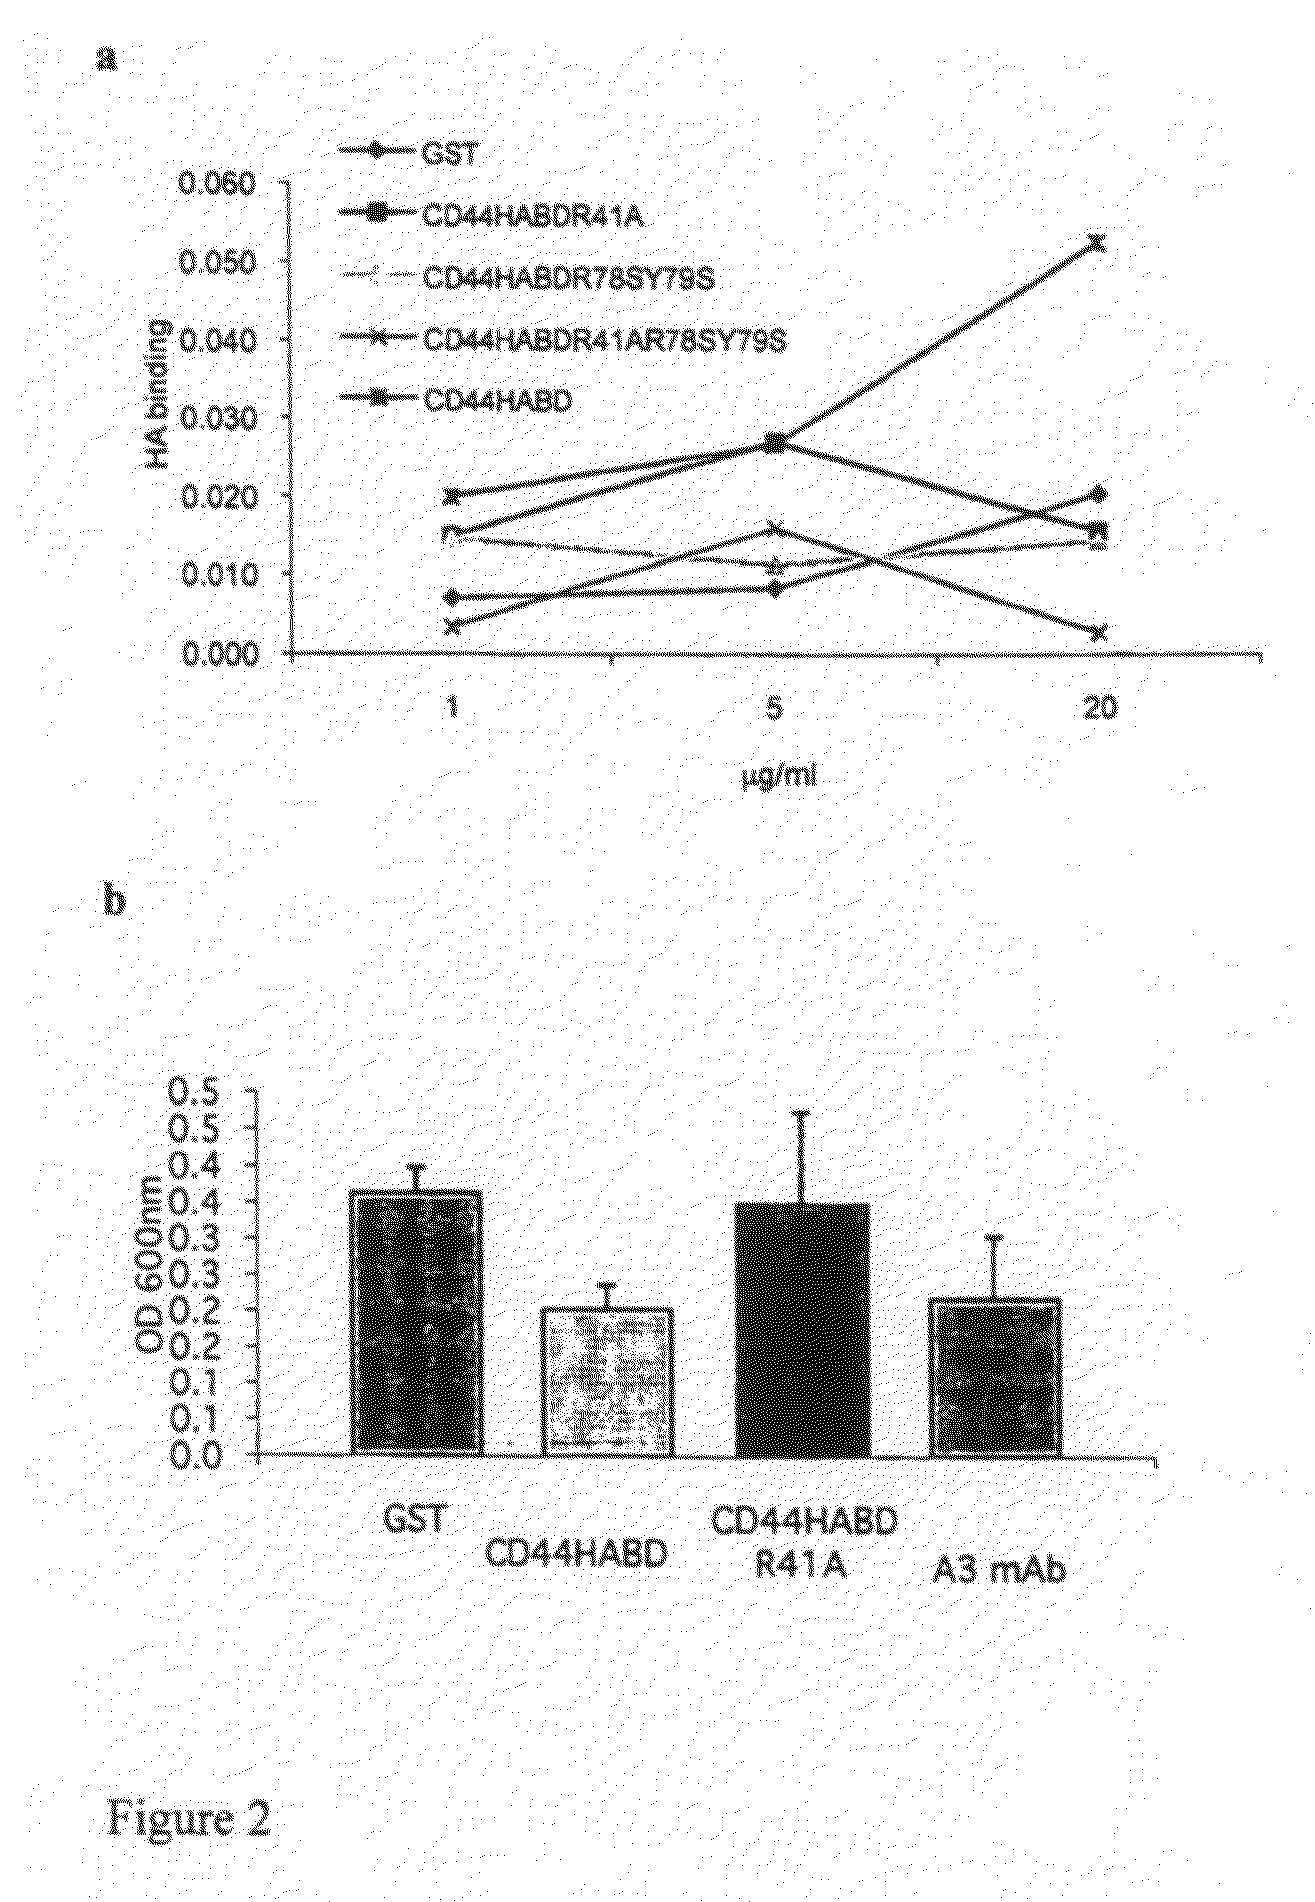 Drug for treating states related to the inhibition of angiogenesis and/or endothelial cell proliferation